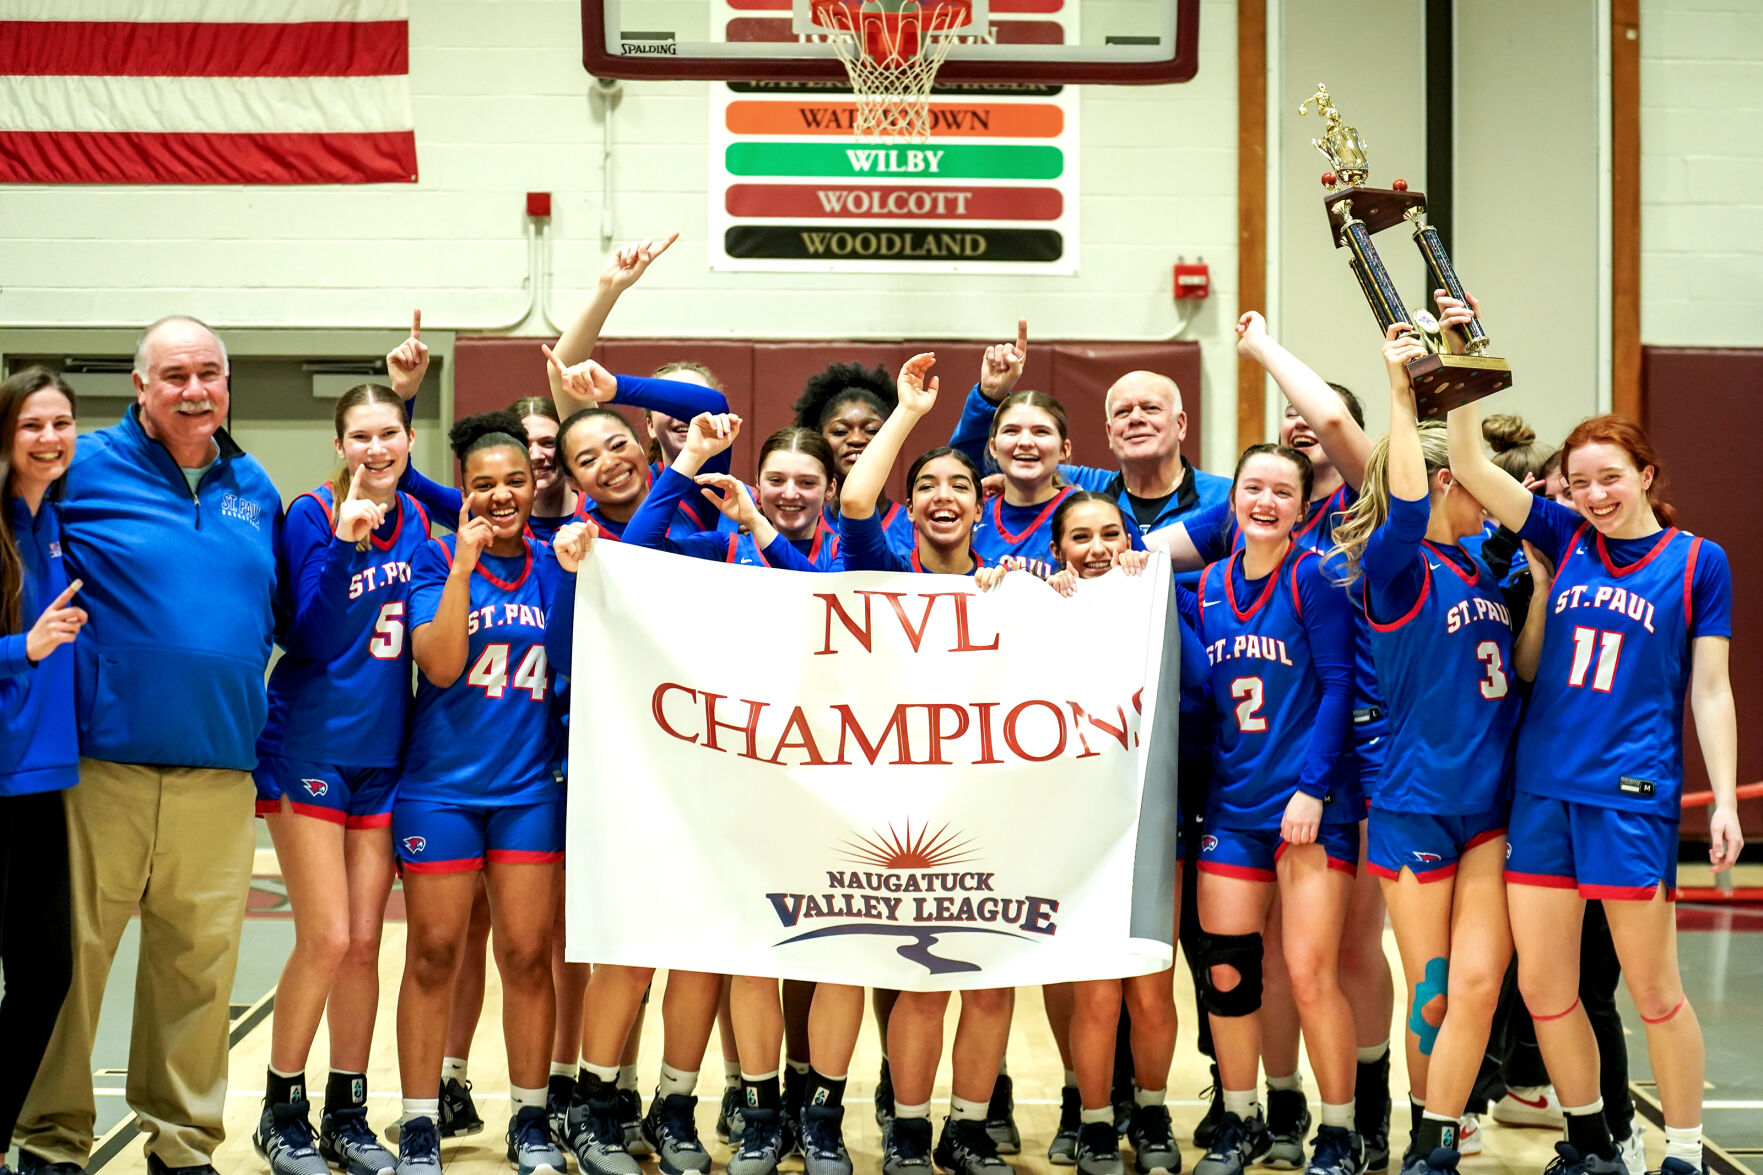 St. Paul Girls Basketball Team Dominates NVL Tournament with Back-to-Back Championships